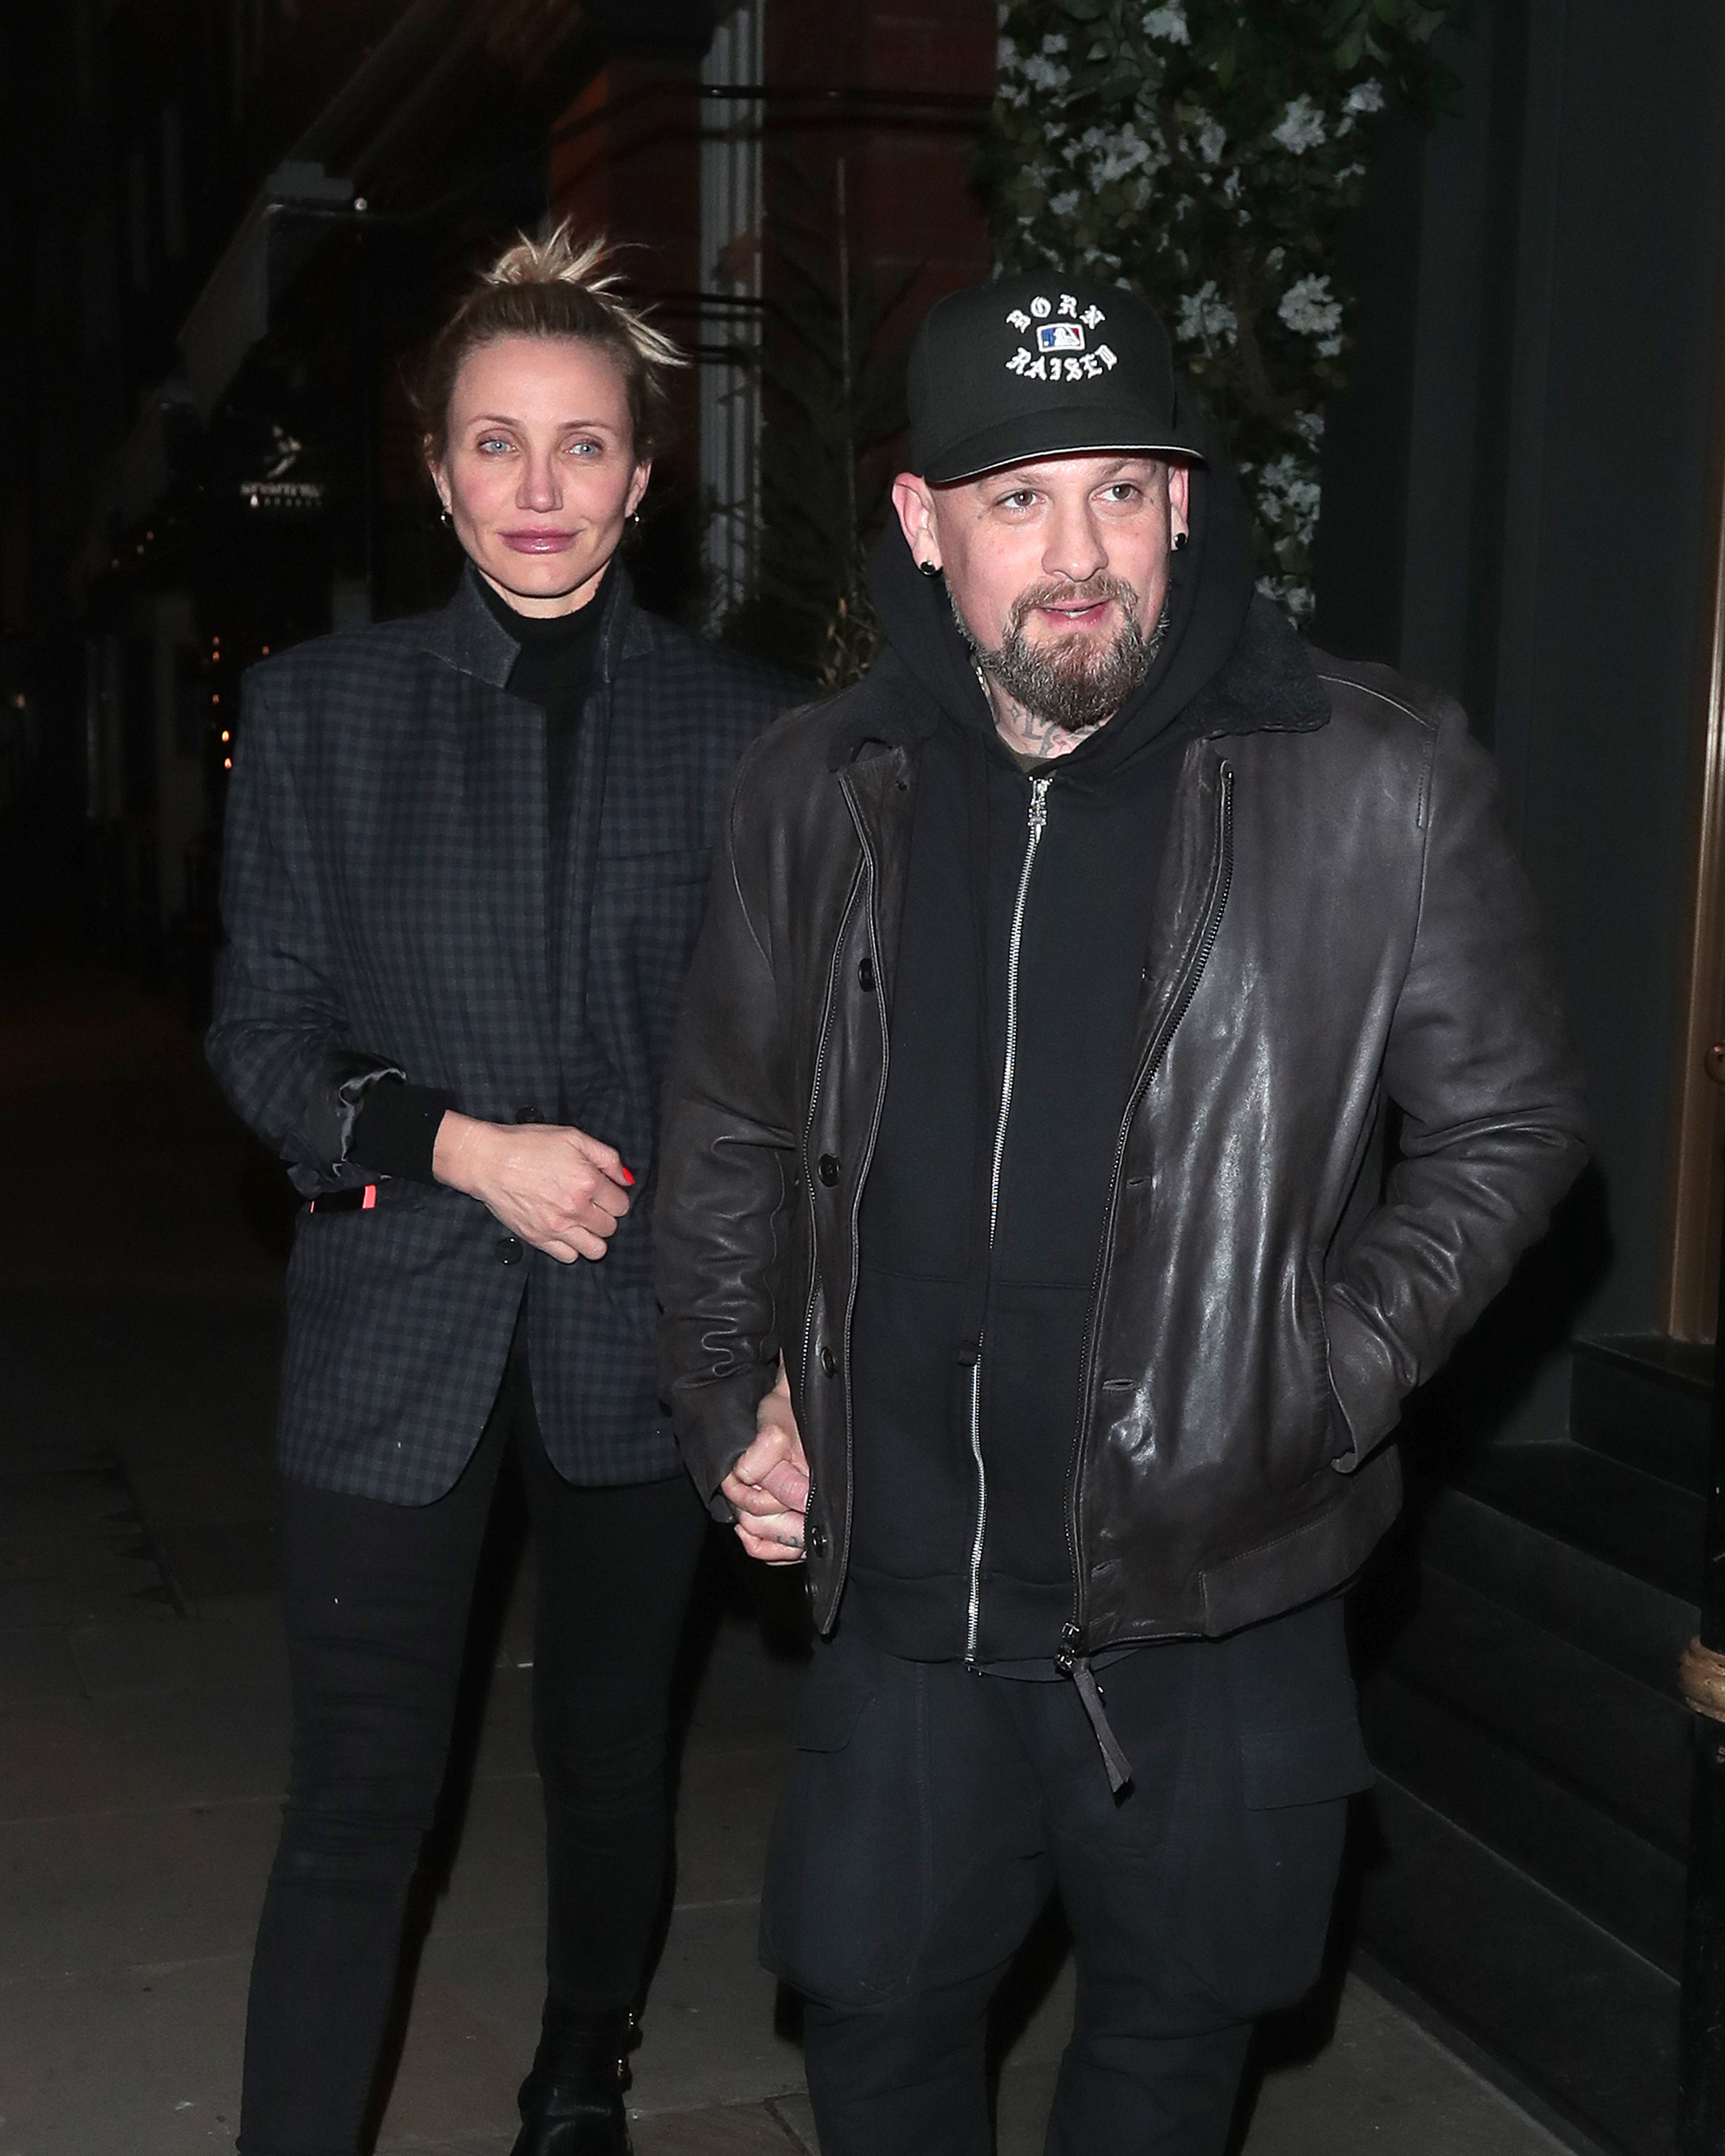 Cameron Diaz and Benji Madden \\\\\\\\u200bseen on a night out at Sparrow Italia - Mayfair restaurant on December 2, 2022, in London, England | Source: Getty Images